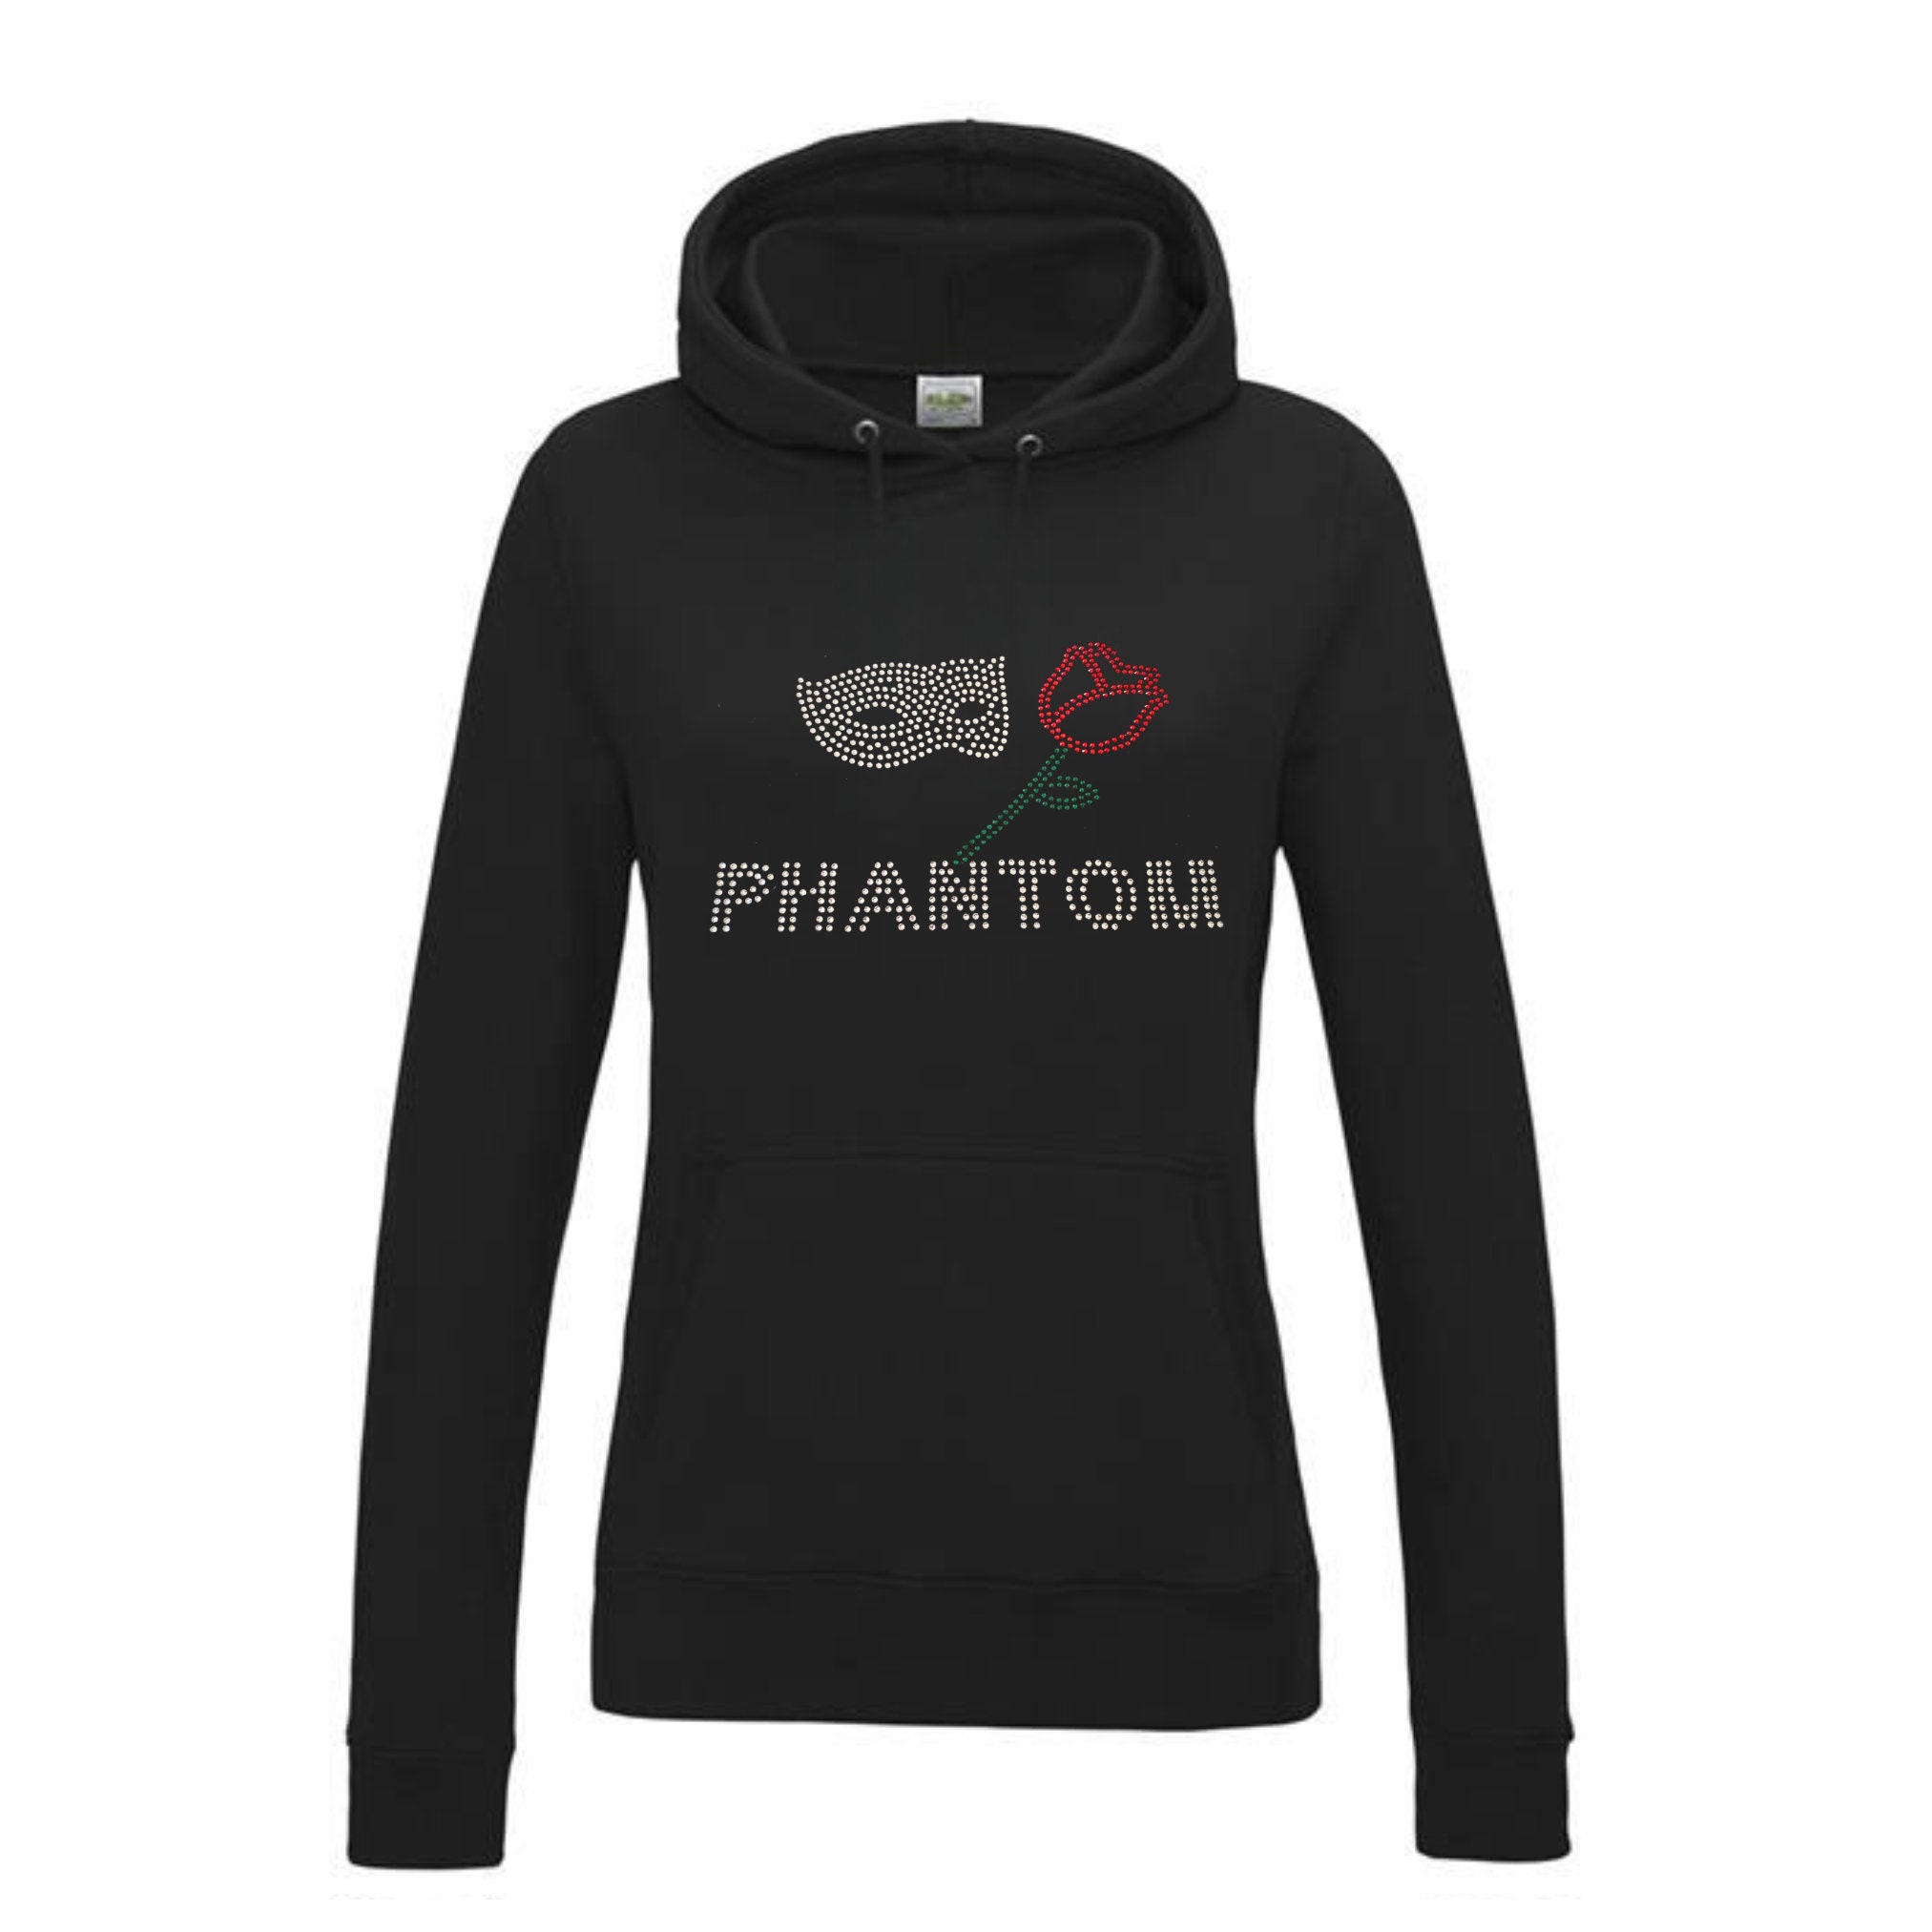 Phantom of the Opera Hoodie, You Are Going to See, Theatre Ticket Gift,  Gifts for Her Birthday Girlfriend, Gifts for Theatre Lovers, Bling 